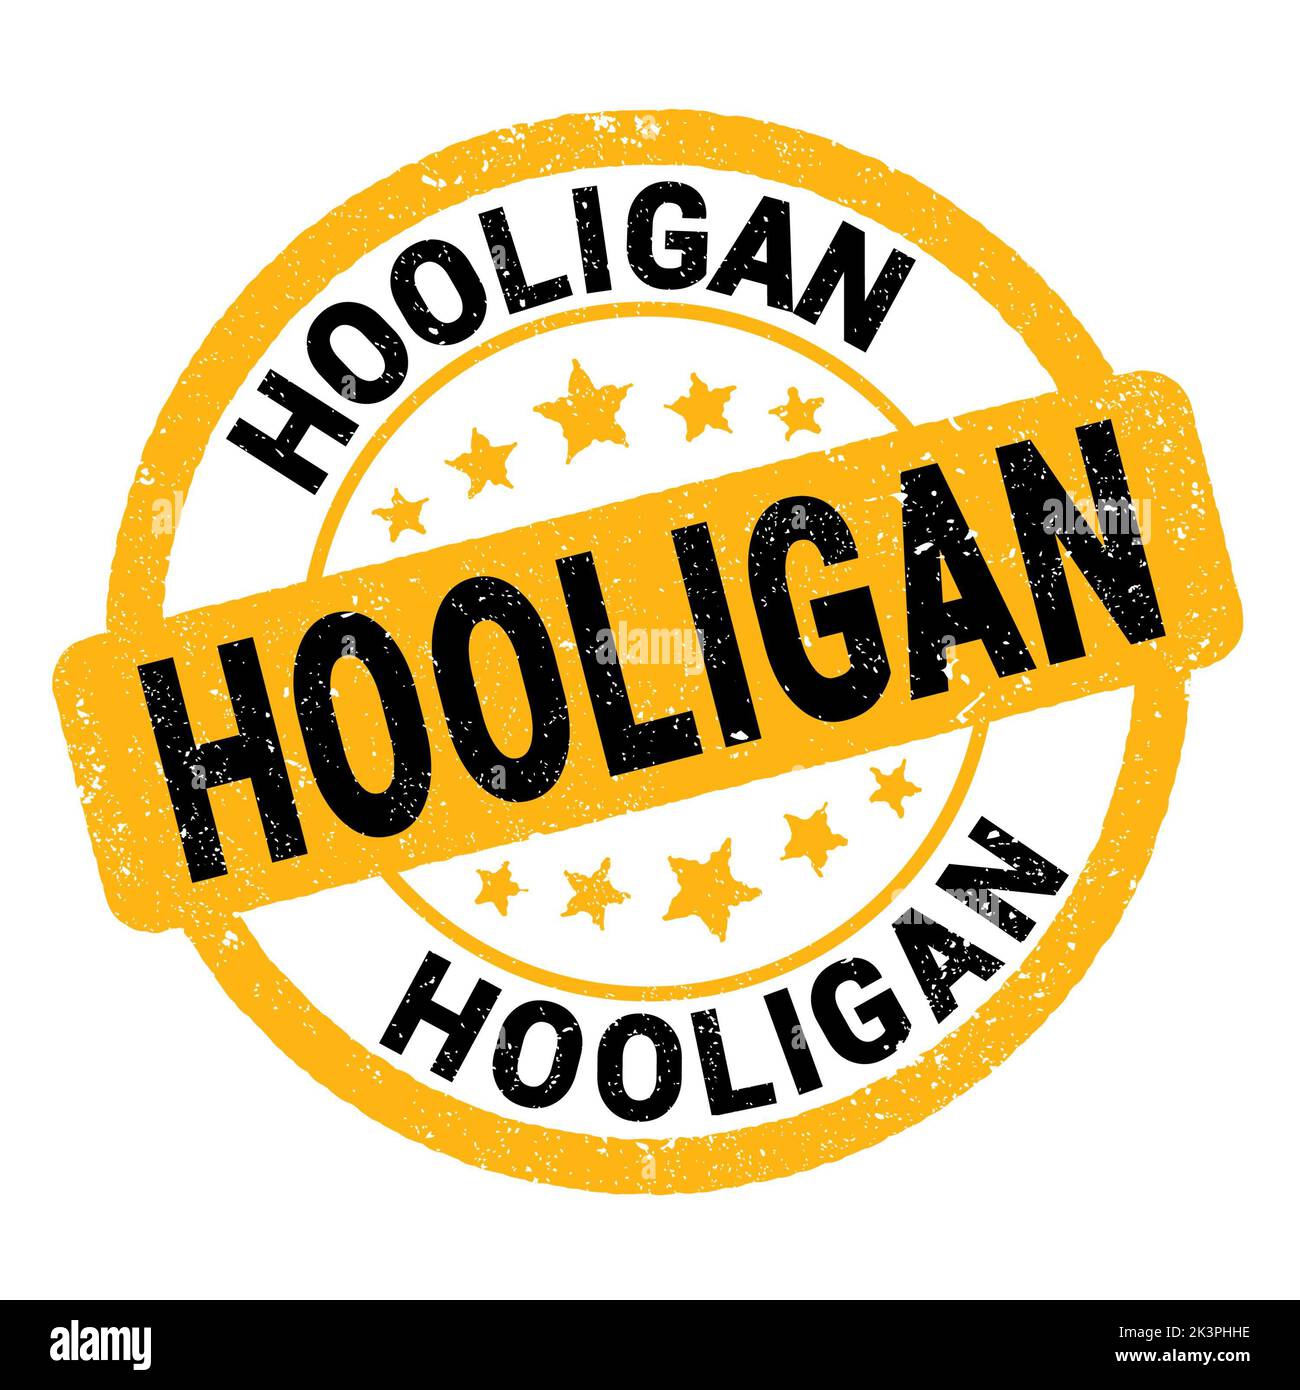 HOOLIGAN text written on yellow-black grungy stamp sign. Stock Photo